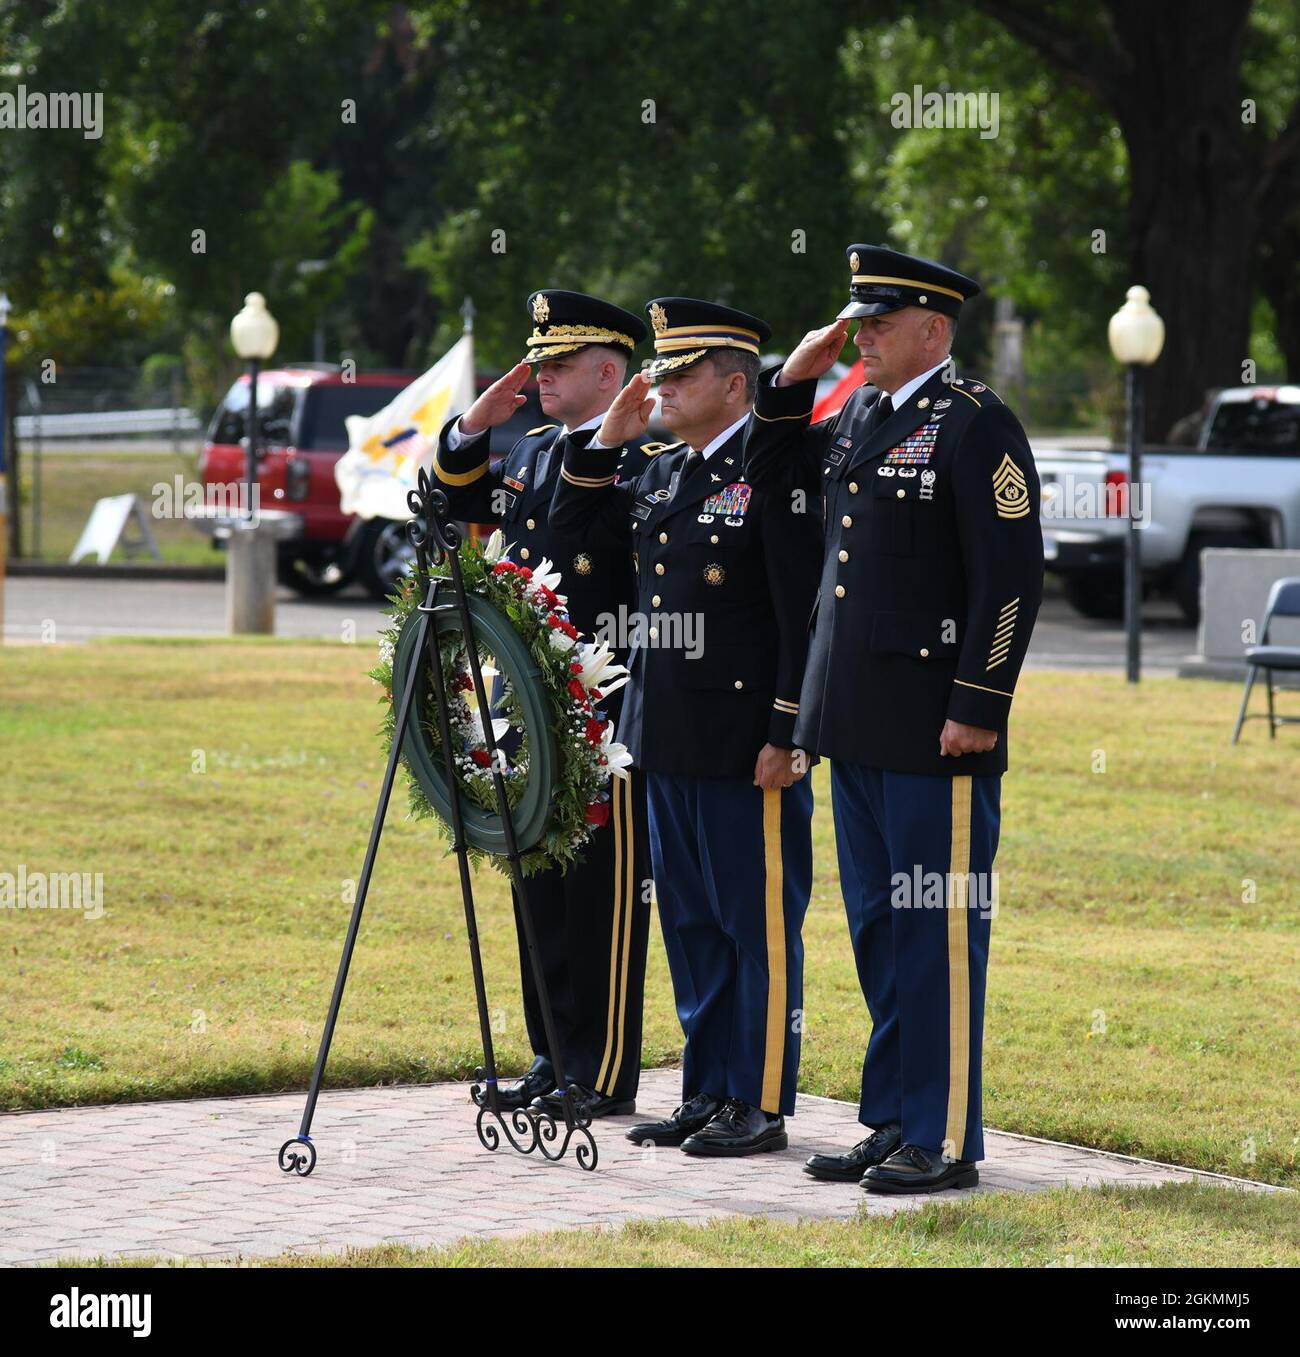 U.S. Army Maj. Gen. David J. Francis, U.S. Army Aviation Center of Excellence and Fort Rucker commander, is joined by Chief Warrant Officer 5 Myke Lewis, chief warrant officer of the aviation branch, and Command Sgt. Maj. James Wilson, aviation branch command sergeant major, to emplace a wreath and render honors while Taps is played at Veterans Park during a Memorial Day Ceremony at Fort Rucker, Alabama, May 28, 2021. Stock Photo